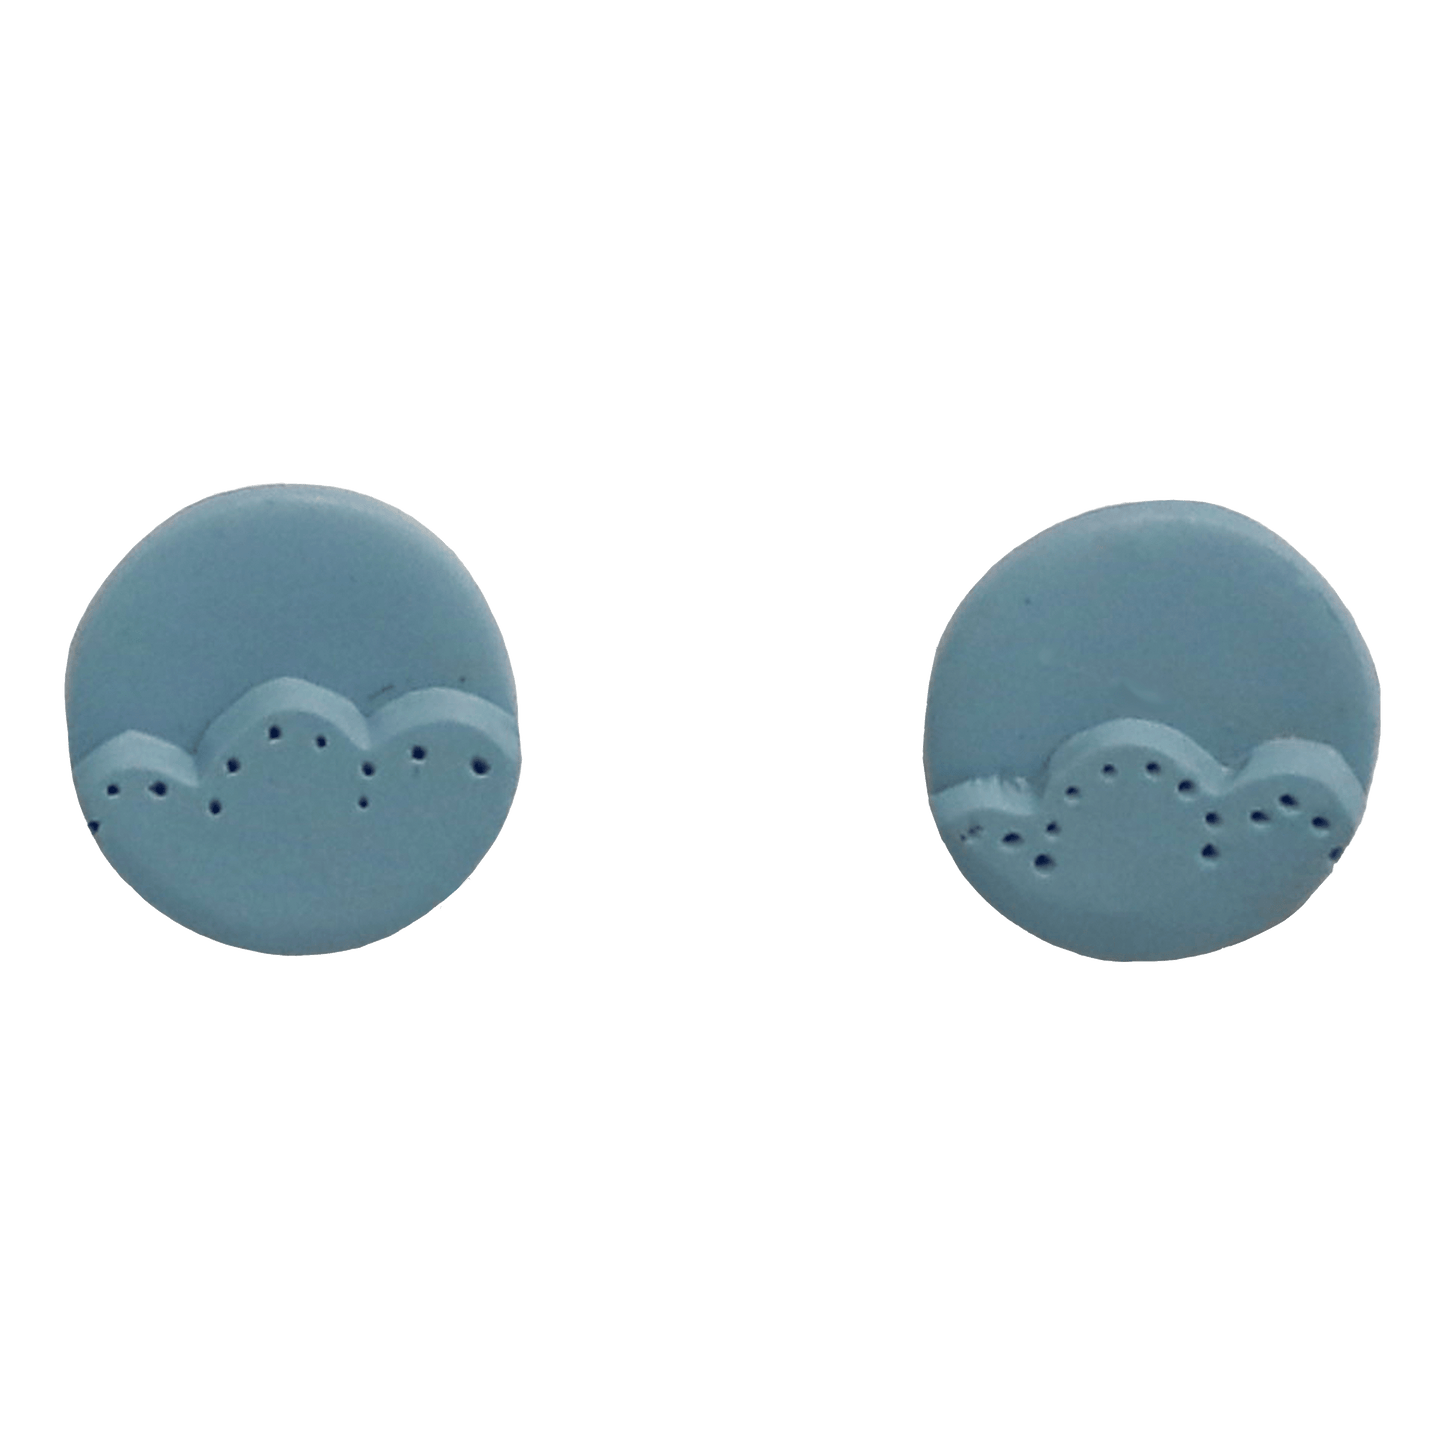 Handcrafted light blue clay earrings - circular shaped with a smooth finish and an added lace texture..